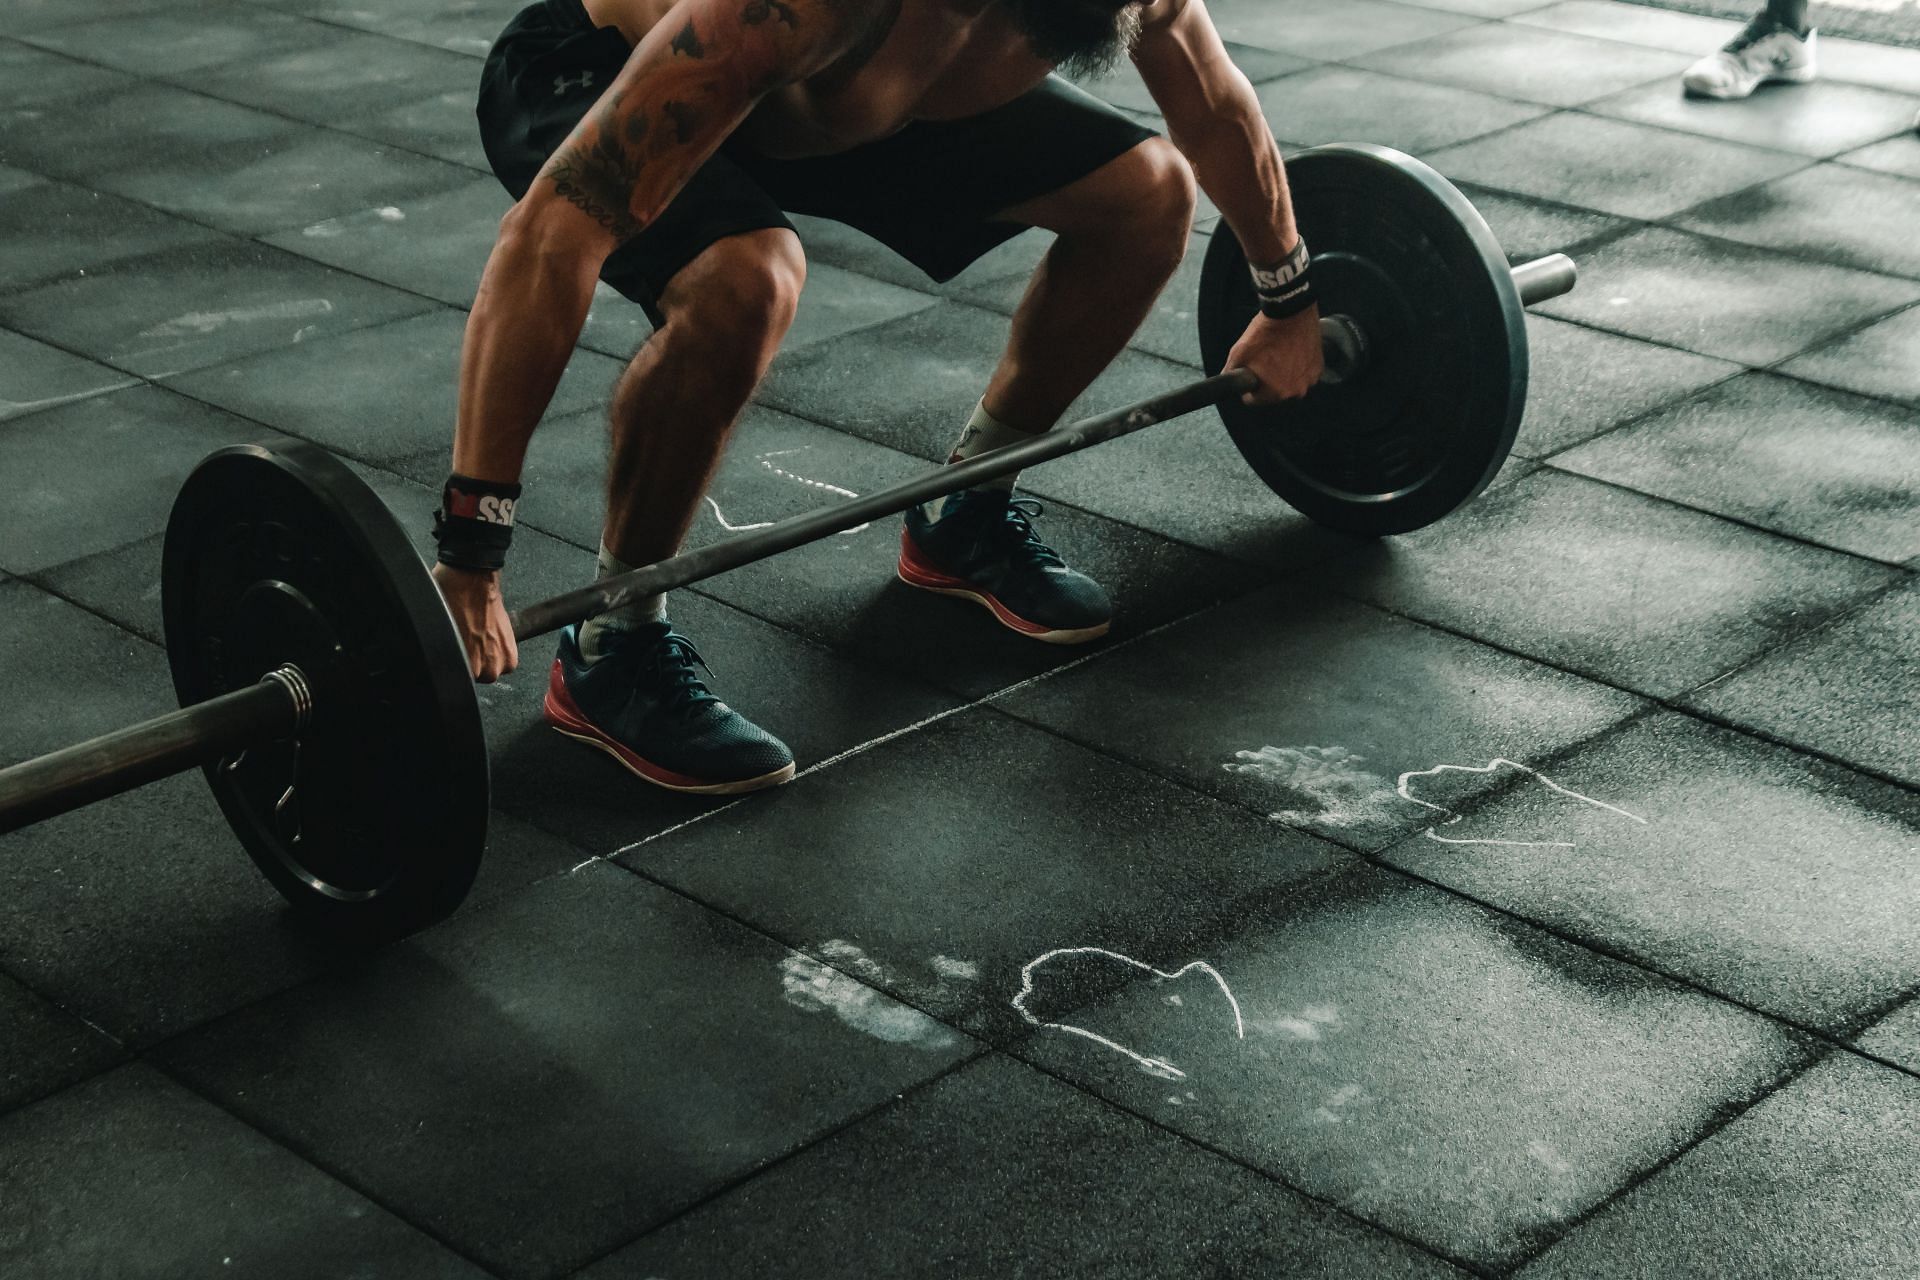 Here are the best exercises to help you get super-jacked! Image via unsplash/Victor Freitas)